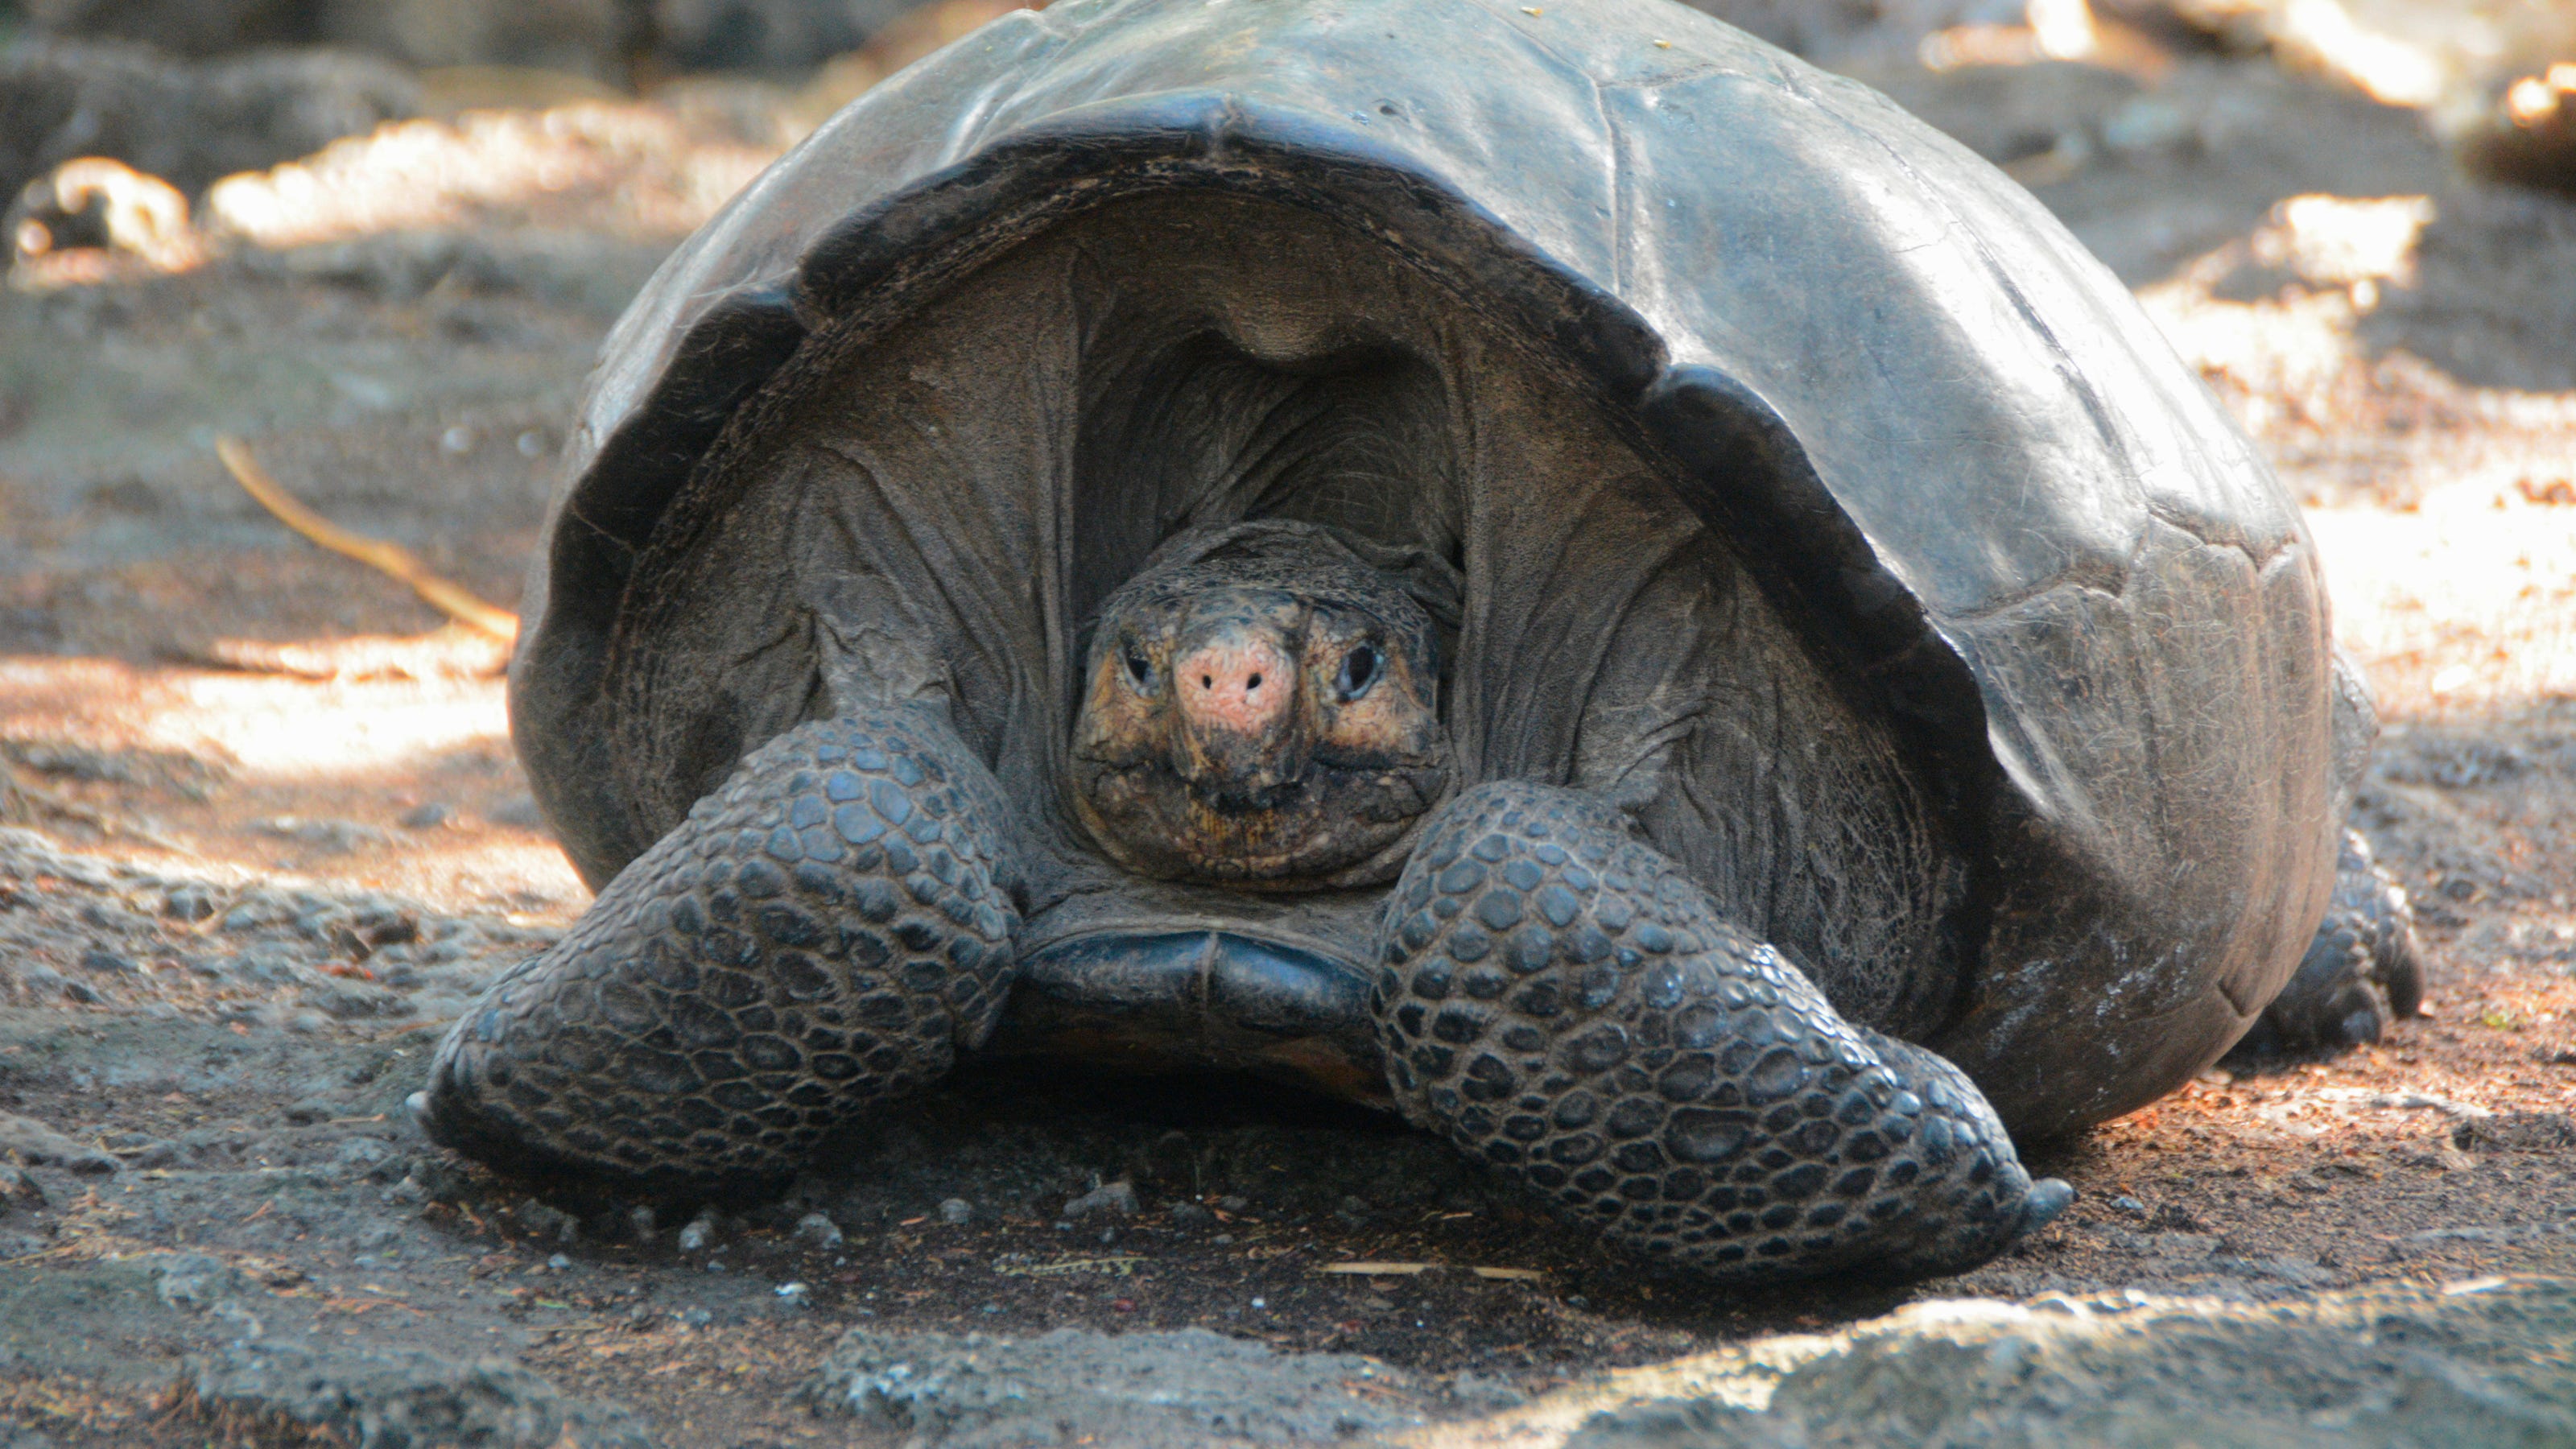 Not seen for 100 years, a rare Galápagos tortoise was considered all but extinct – until now